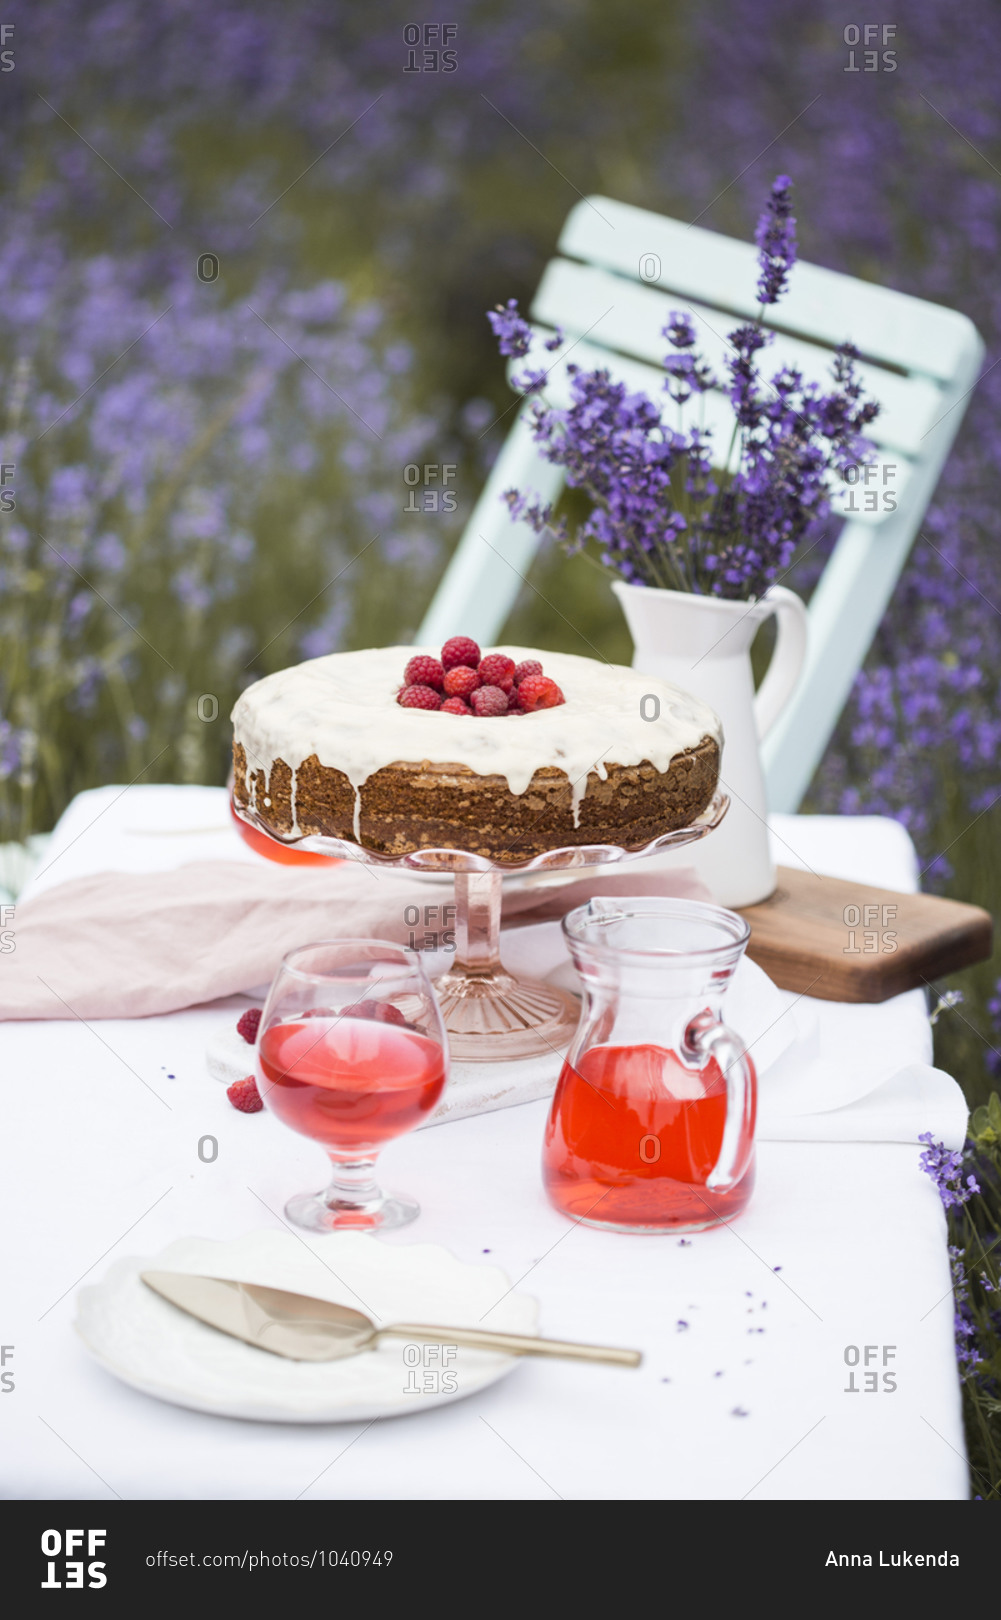 Carrot cake with raspberries with fruity drink on a table in a lavender field